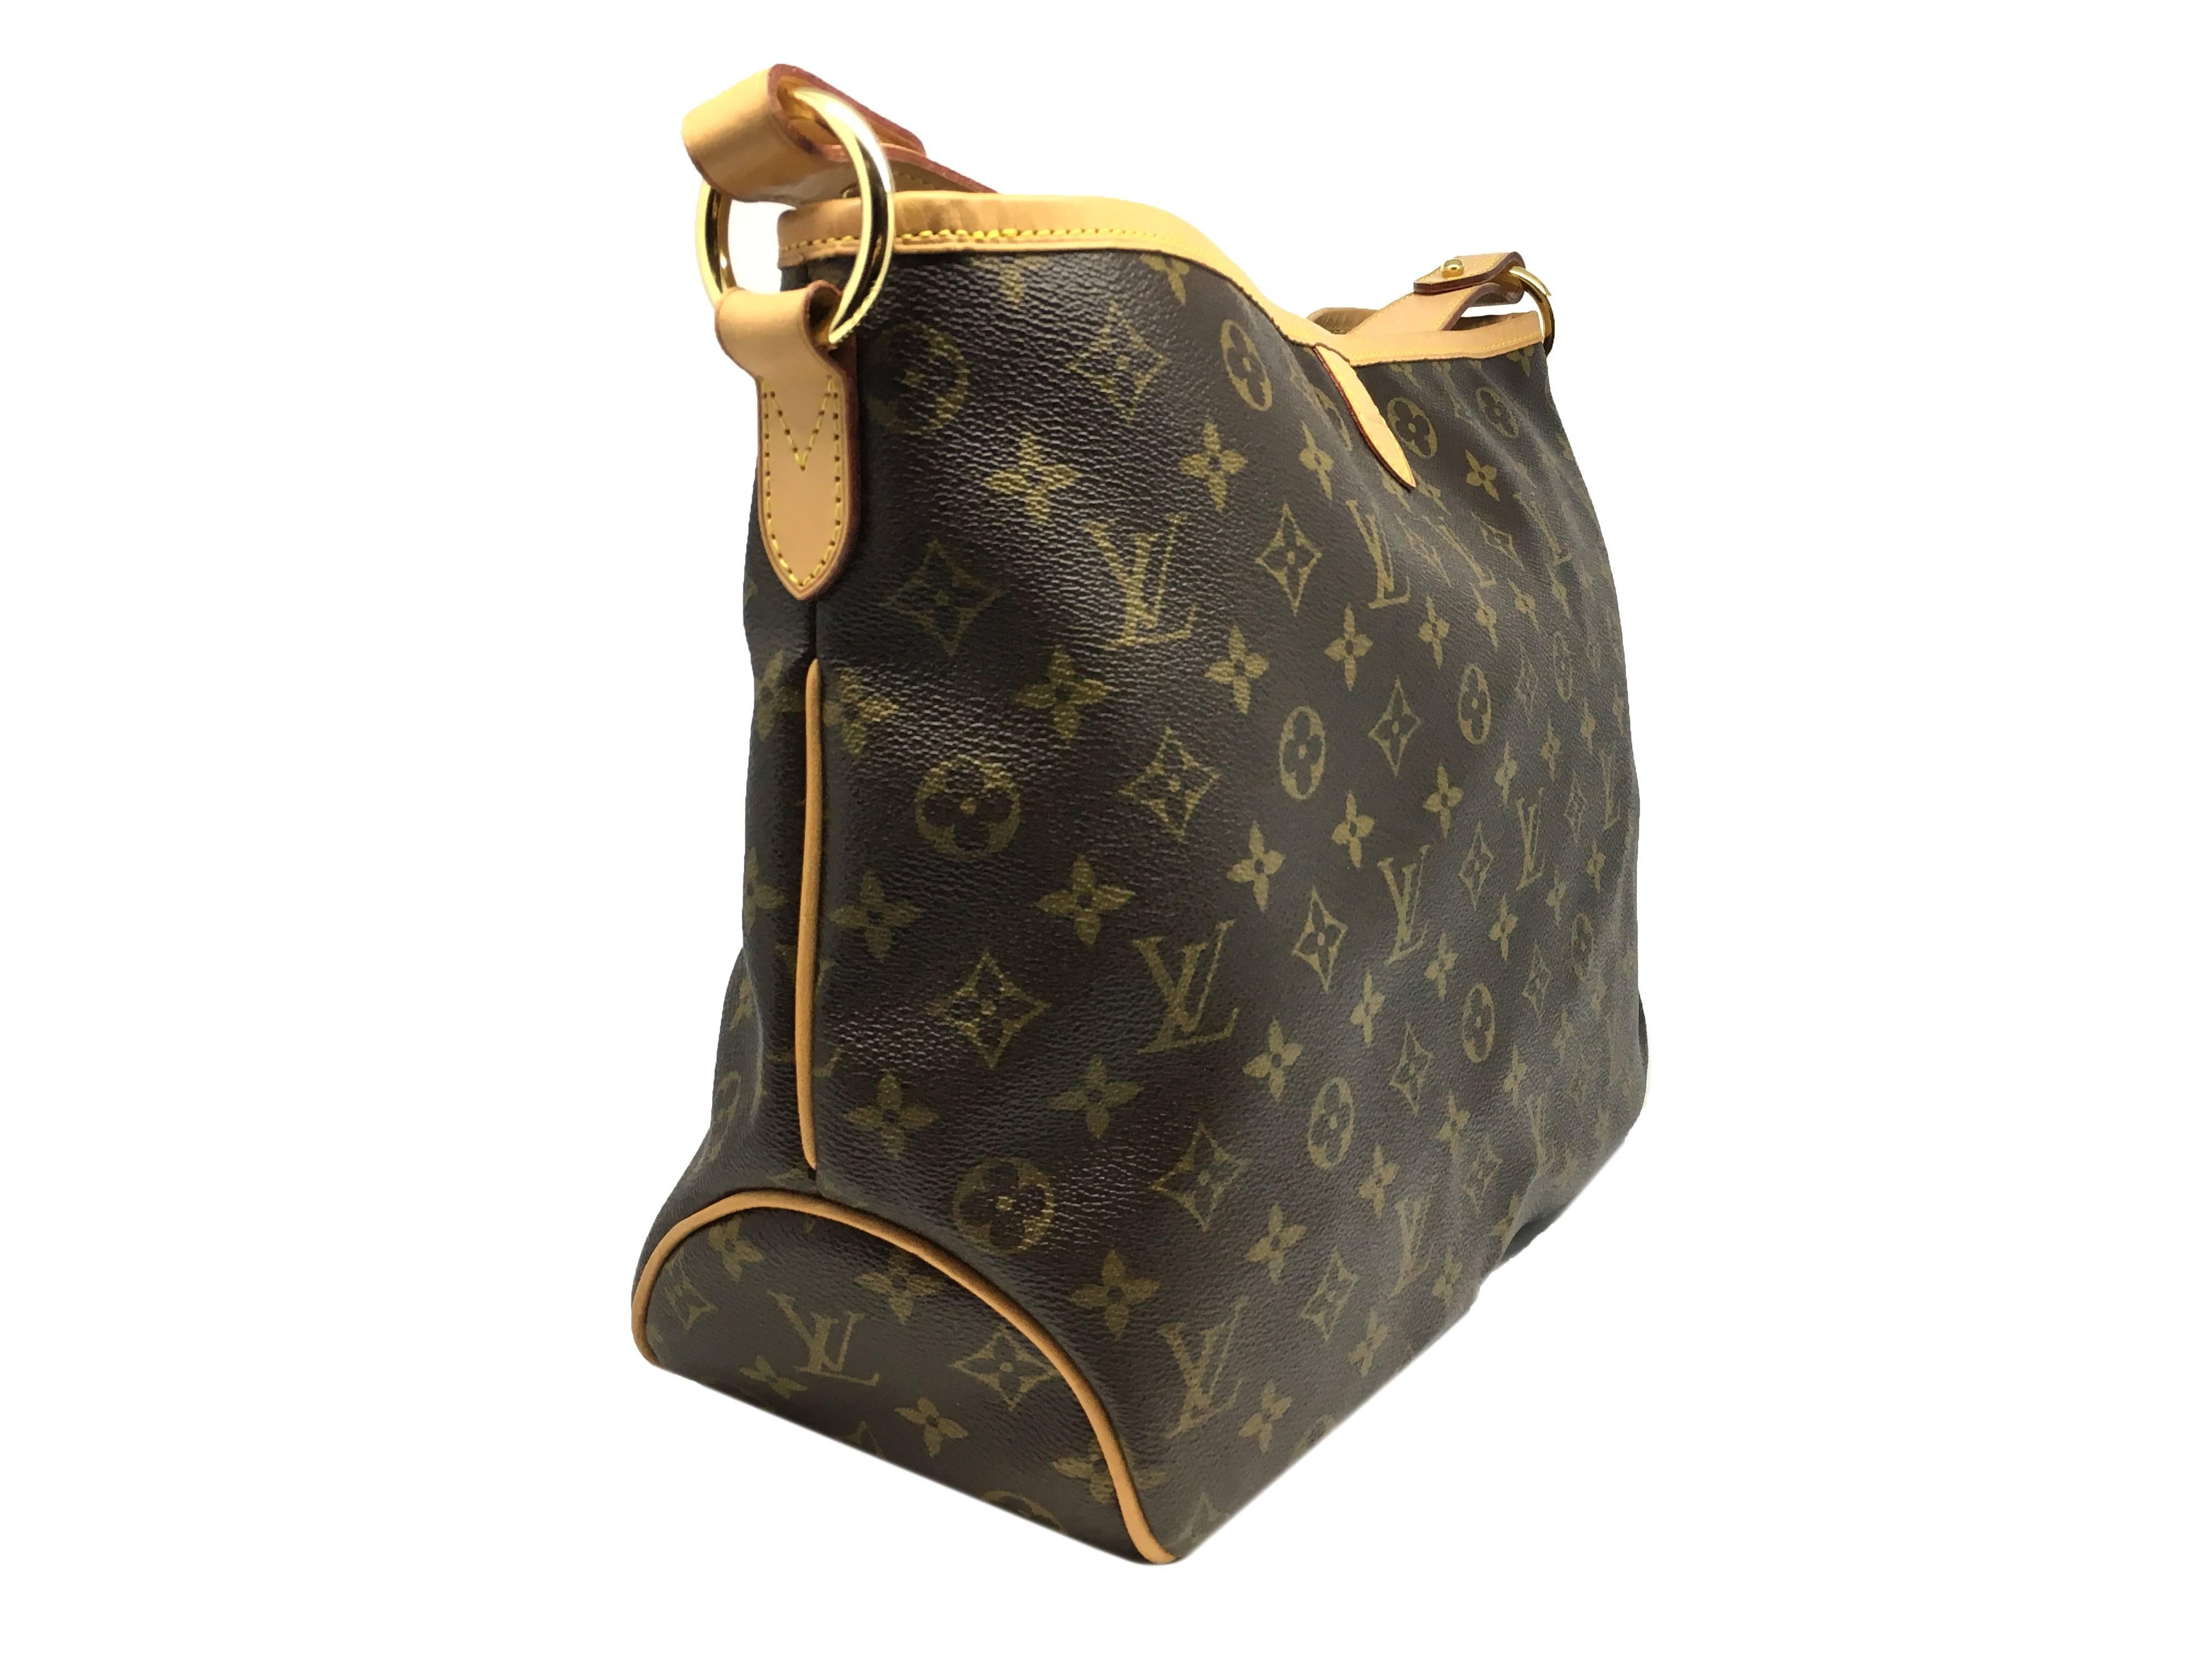 Color: Brown
Material: Monogram

Condition: Rank A 
Overall: Good, few minor defects
Surface: Good
Corners: Minor Scratche 
Edges: Good
Handles/Straps: Minor Scratches
Hardware: Good
Inside: Minor Smell
Dimension: W38 × H27.5 × D13cm（W14.9" ×